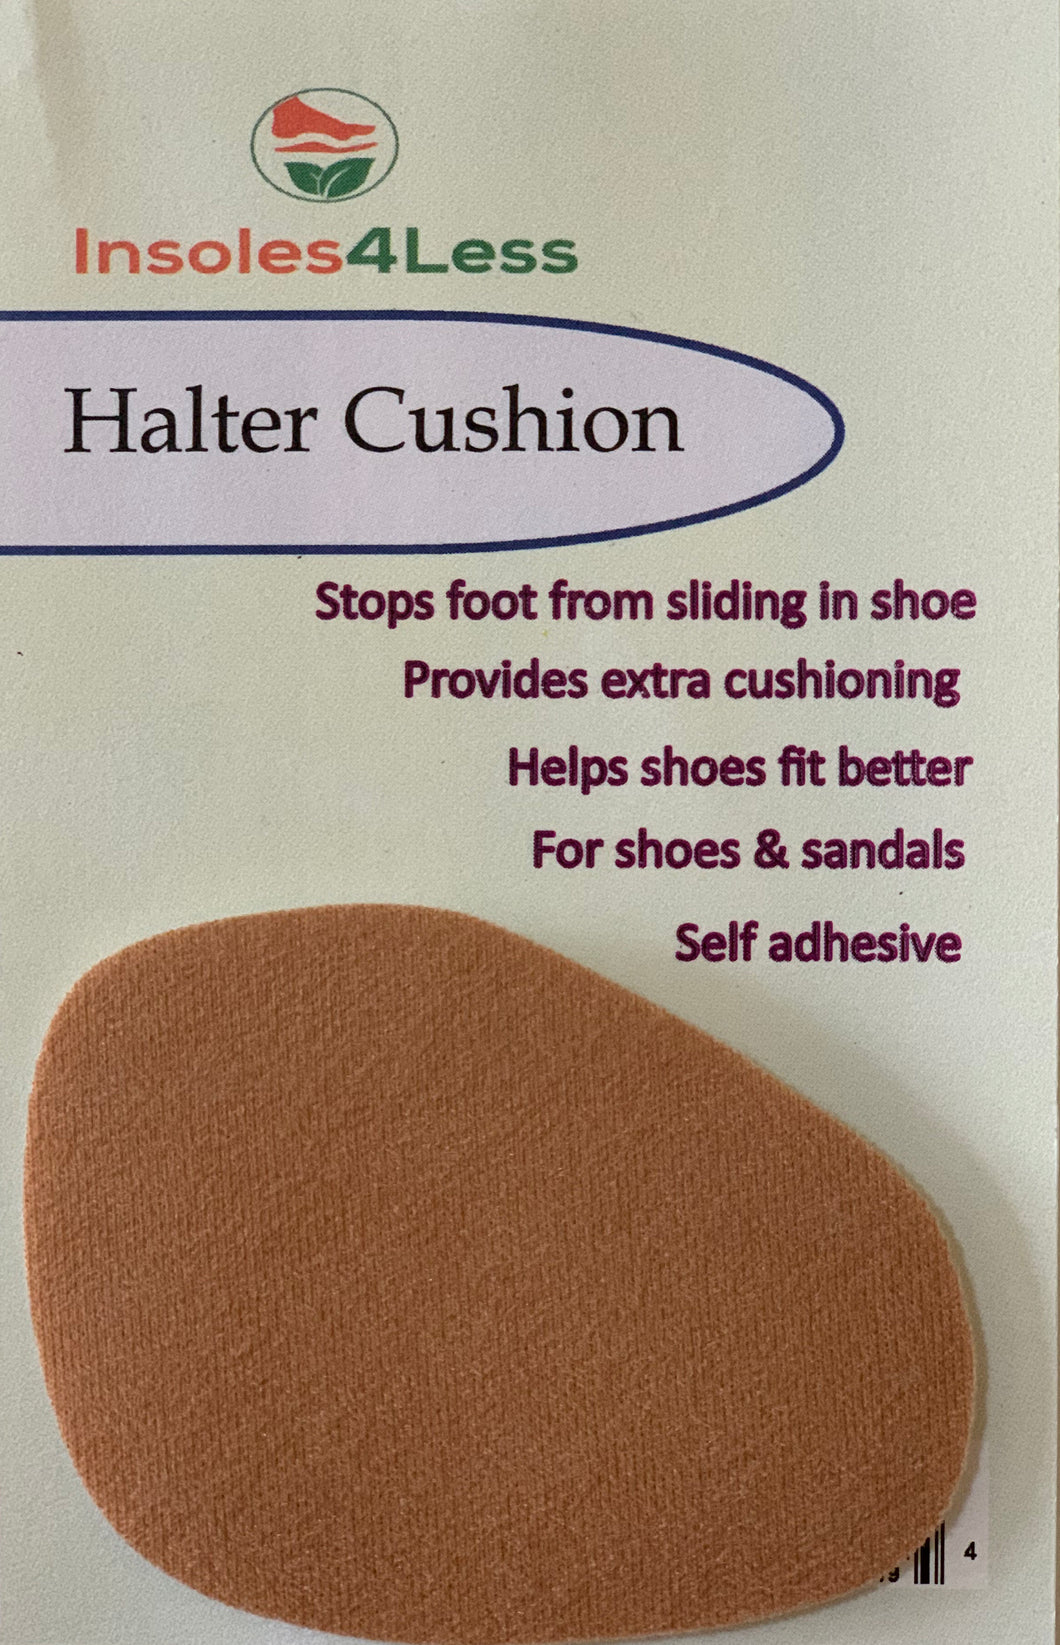 Killer Heels Comfort: Wear All High Heels and Flats Without Foot Pain